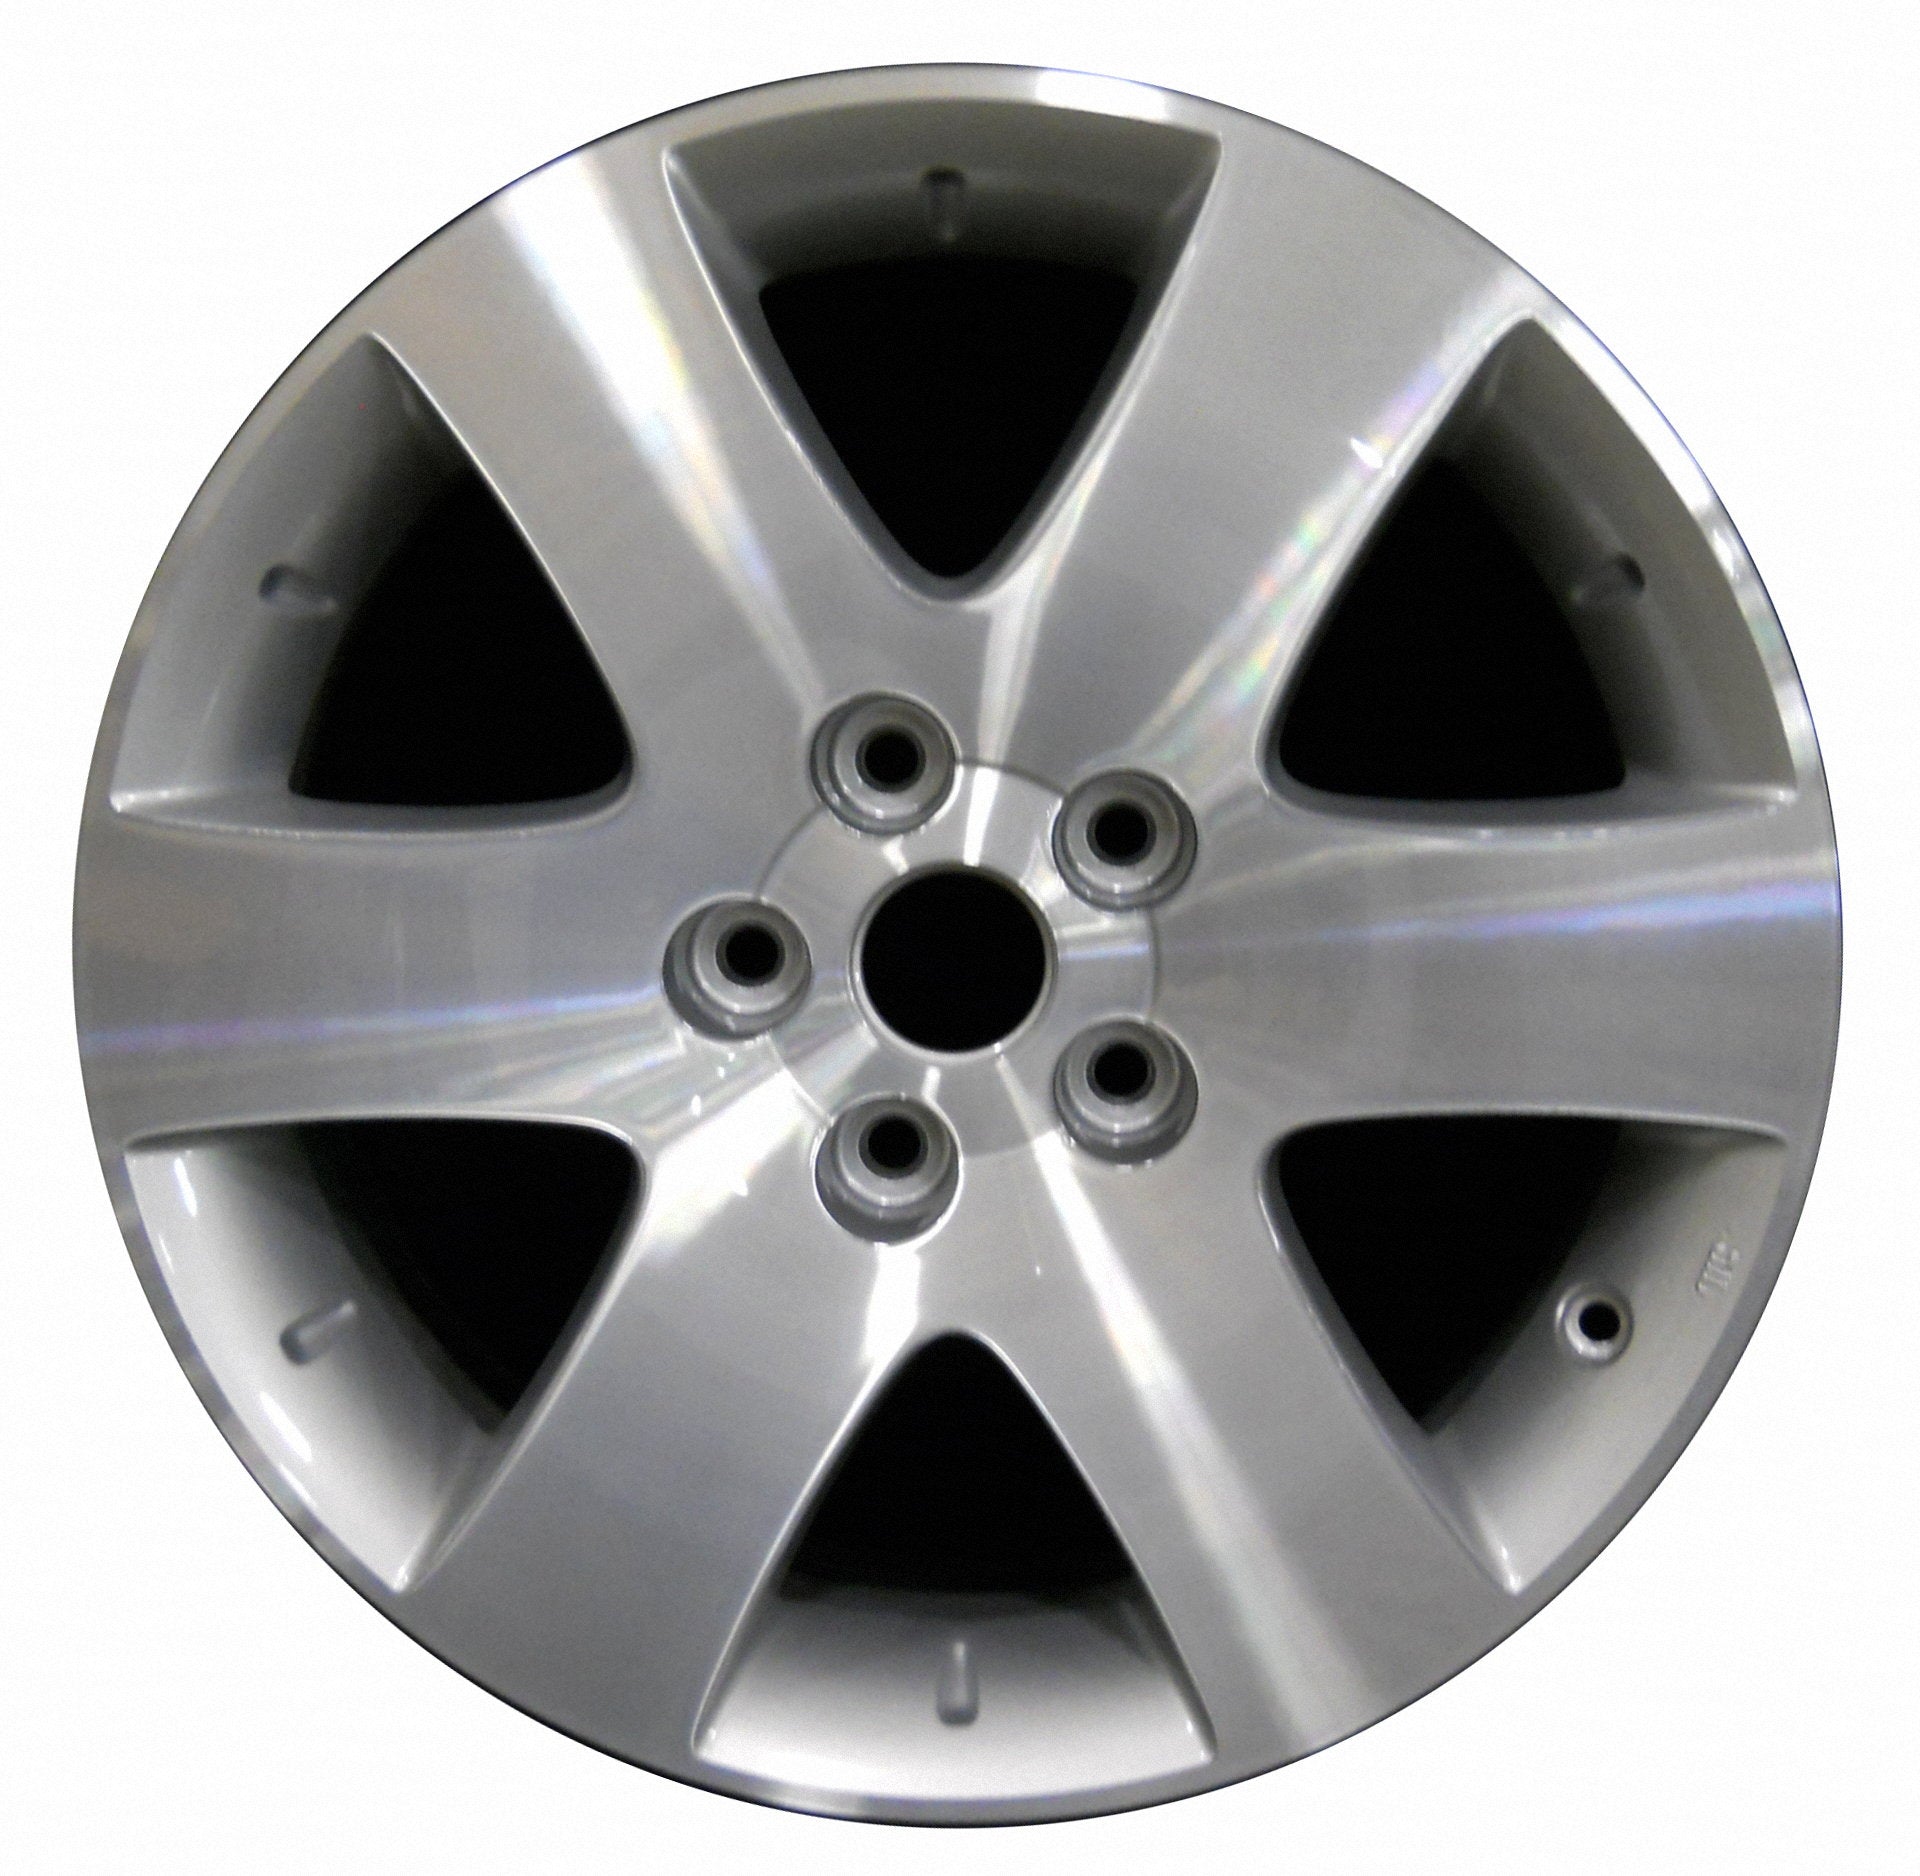 Nissan Quest  2003, 2004, 2005, 2006, 2007 Factory OEM Car Wheel Size 17x6.5 Alloy WAO.62428.PS07.MA